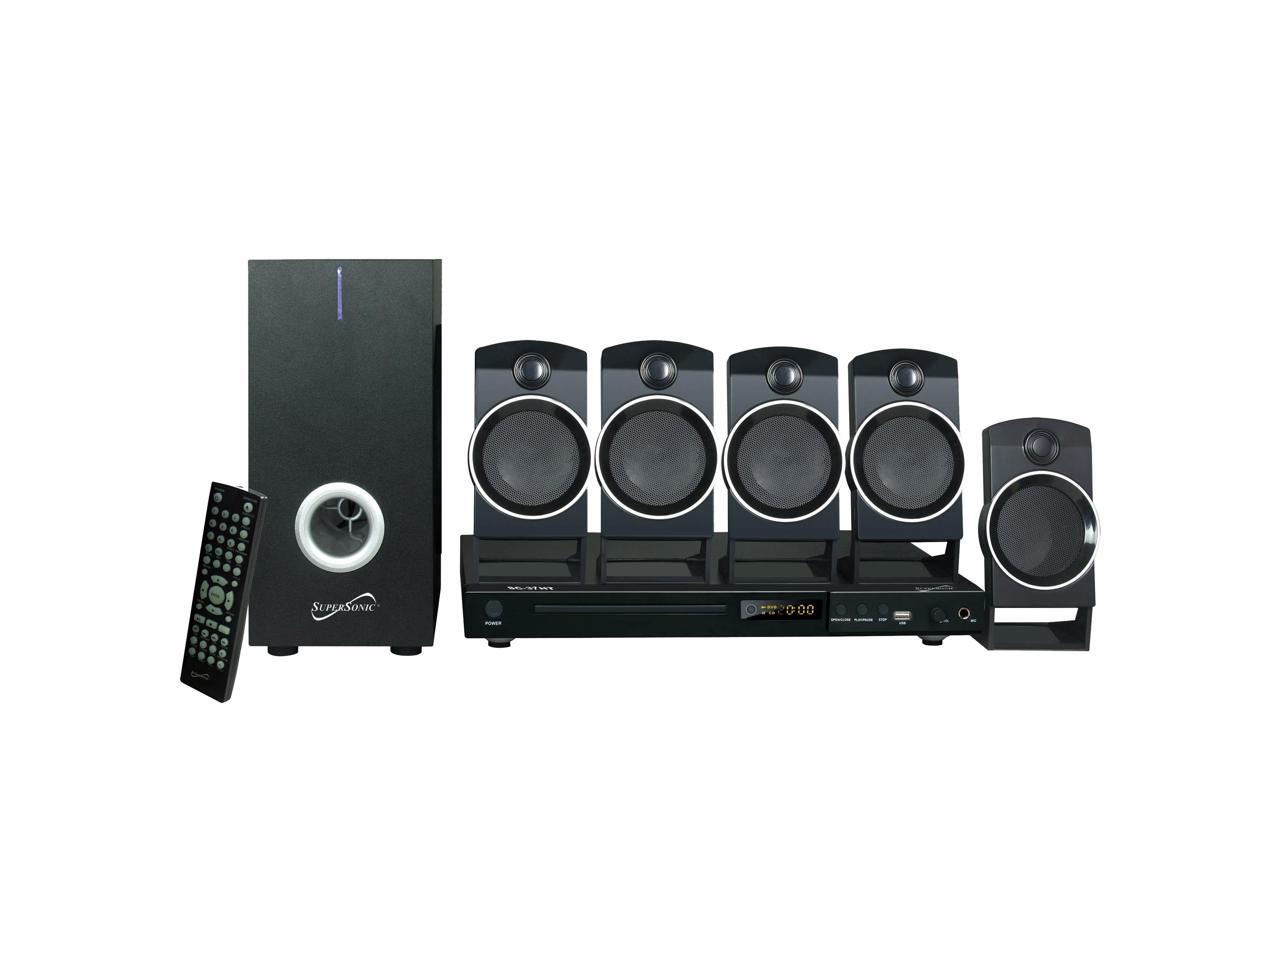 SUPERSONIC SC-37HT 5.1 Channel Dvd Home Theater System With USB Input & Karaoke Function - image 3 of 13